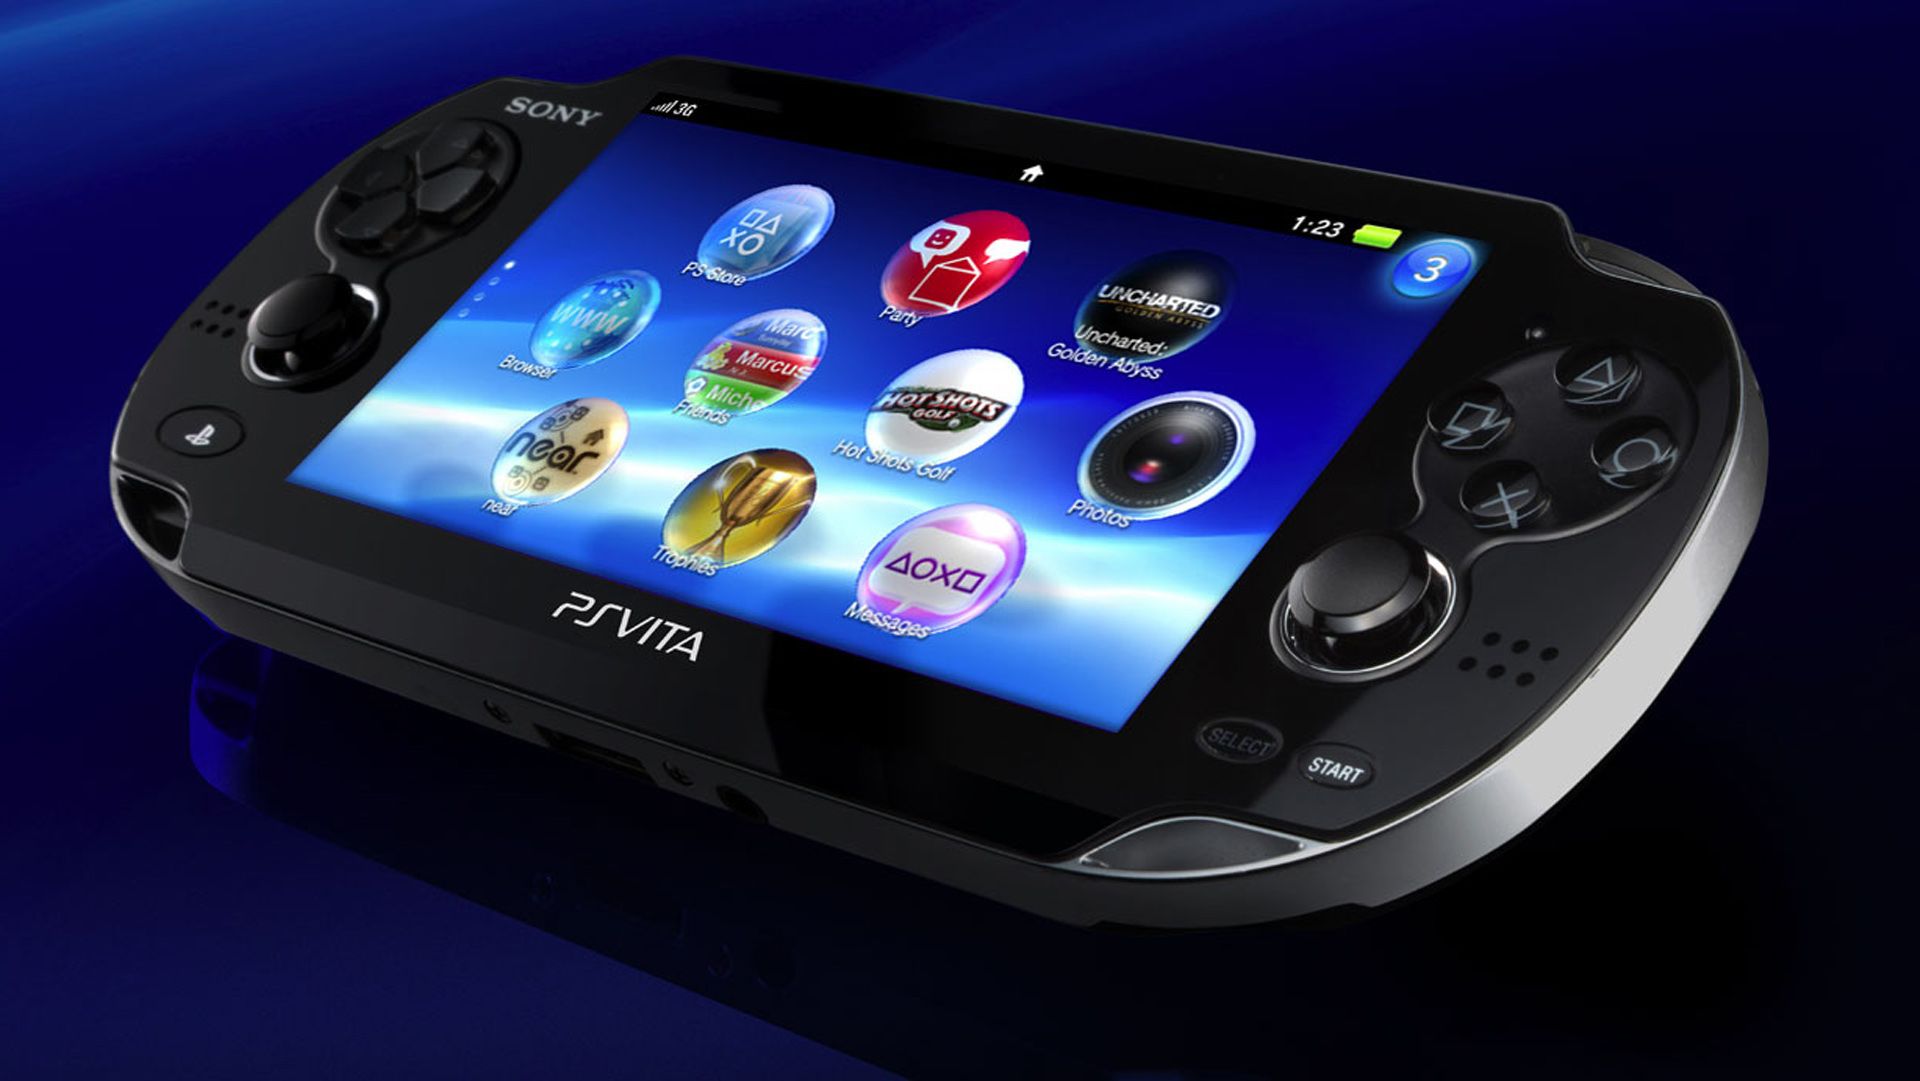 The developers that supported the PlayStation Vita until the very